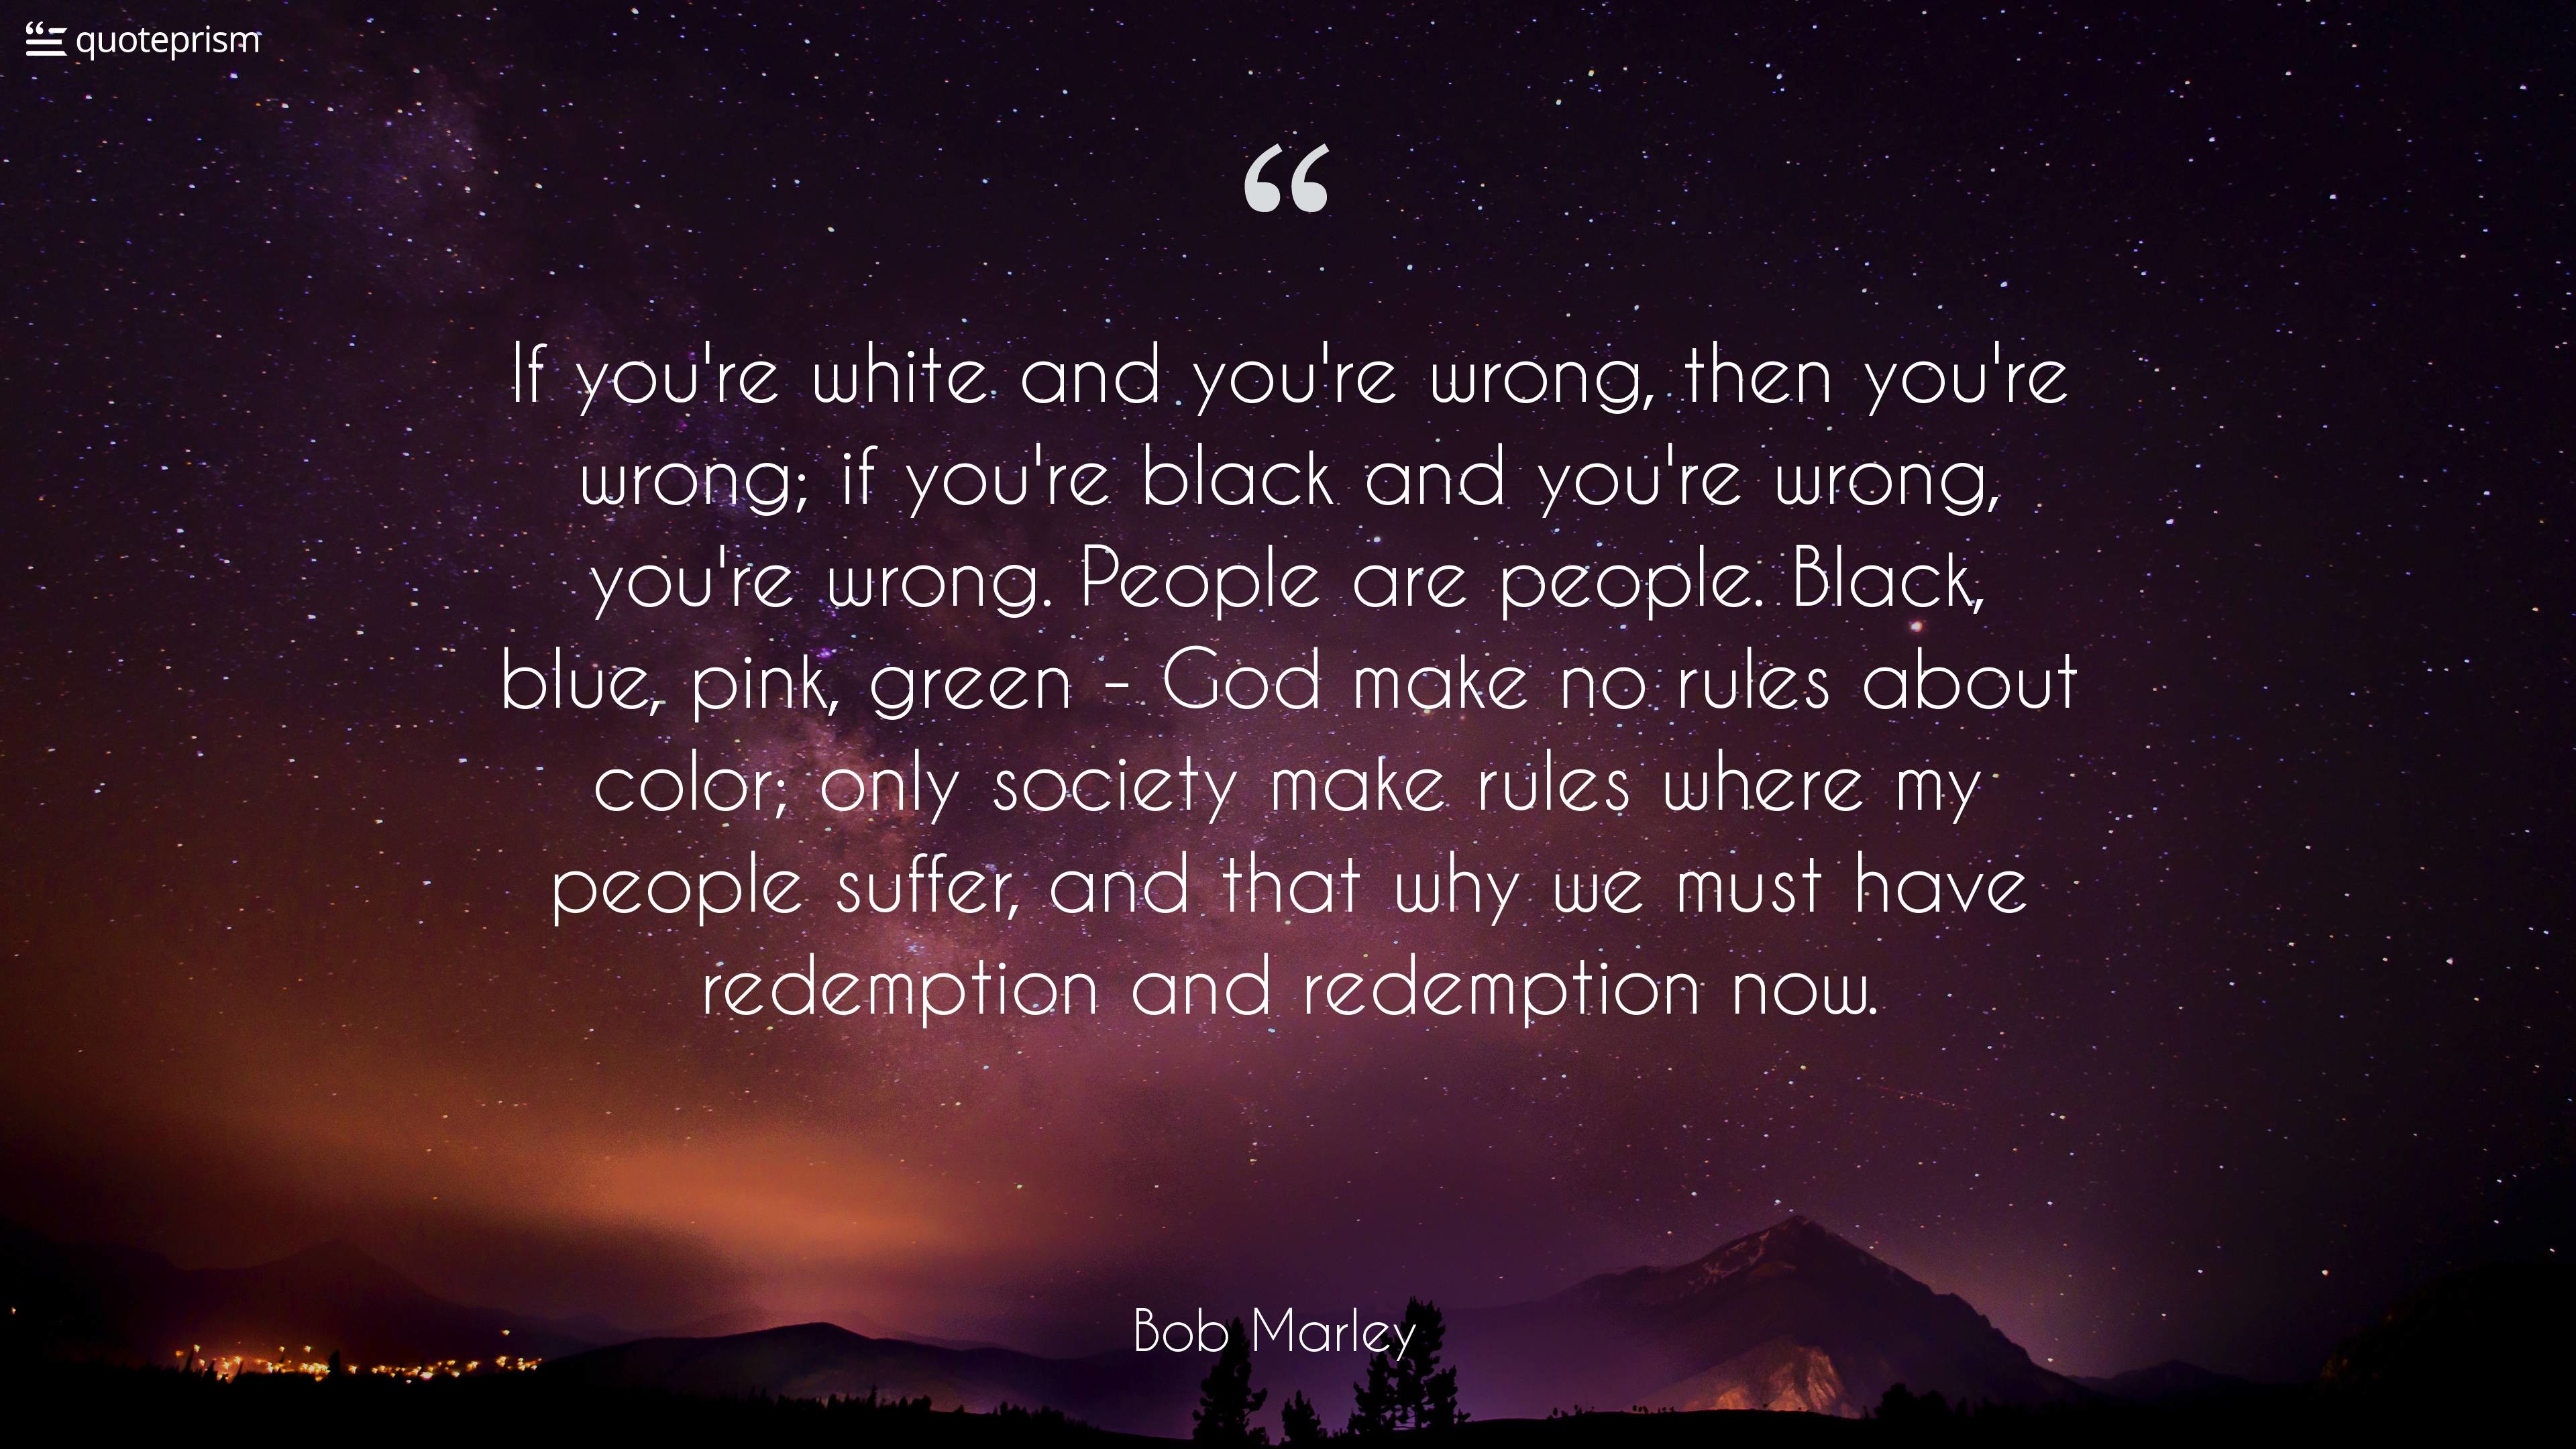 3840x2160 88 bob marley quotes quoteprism i only have one thing i really like to see  happen